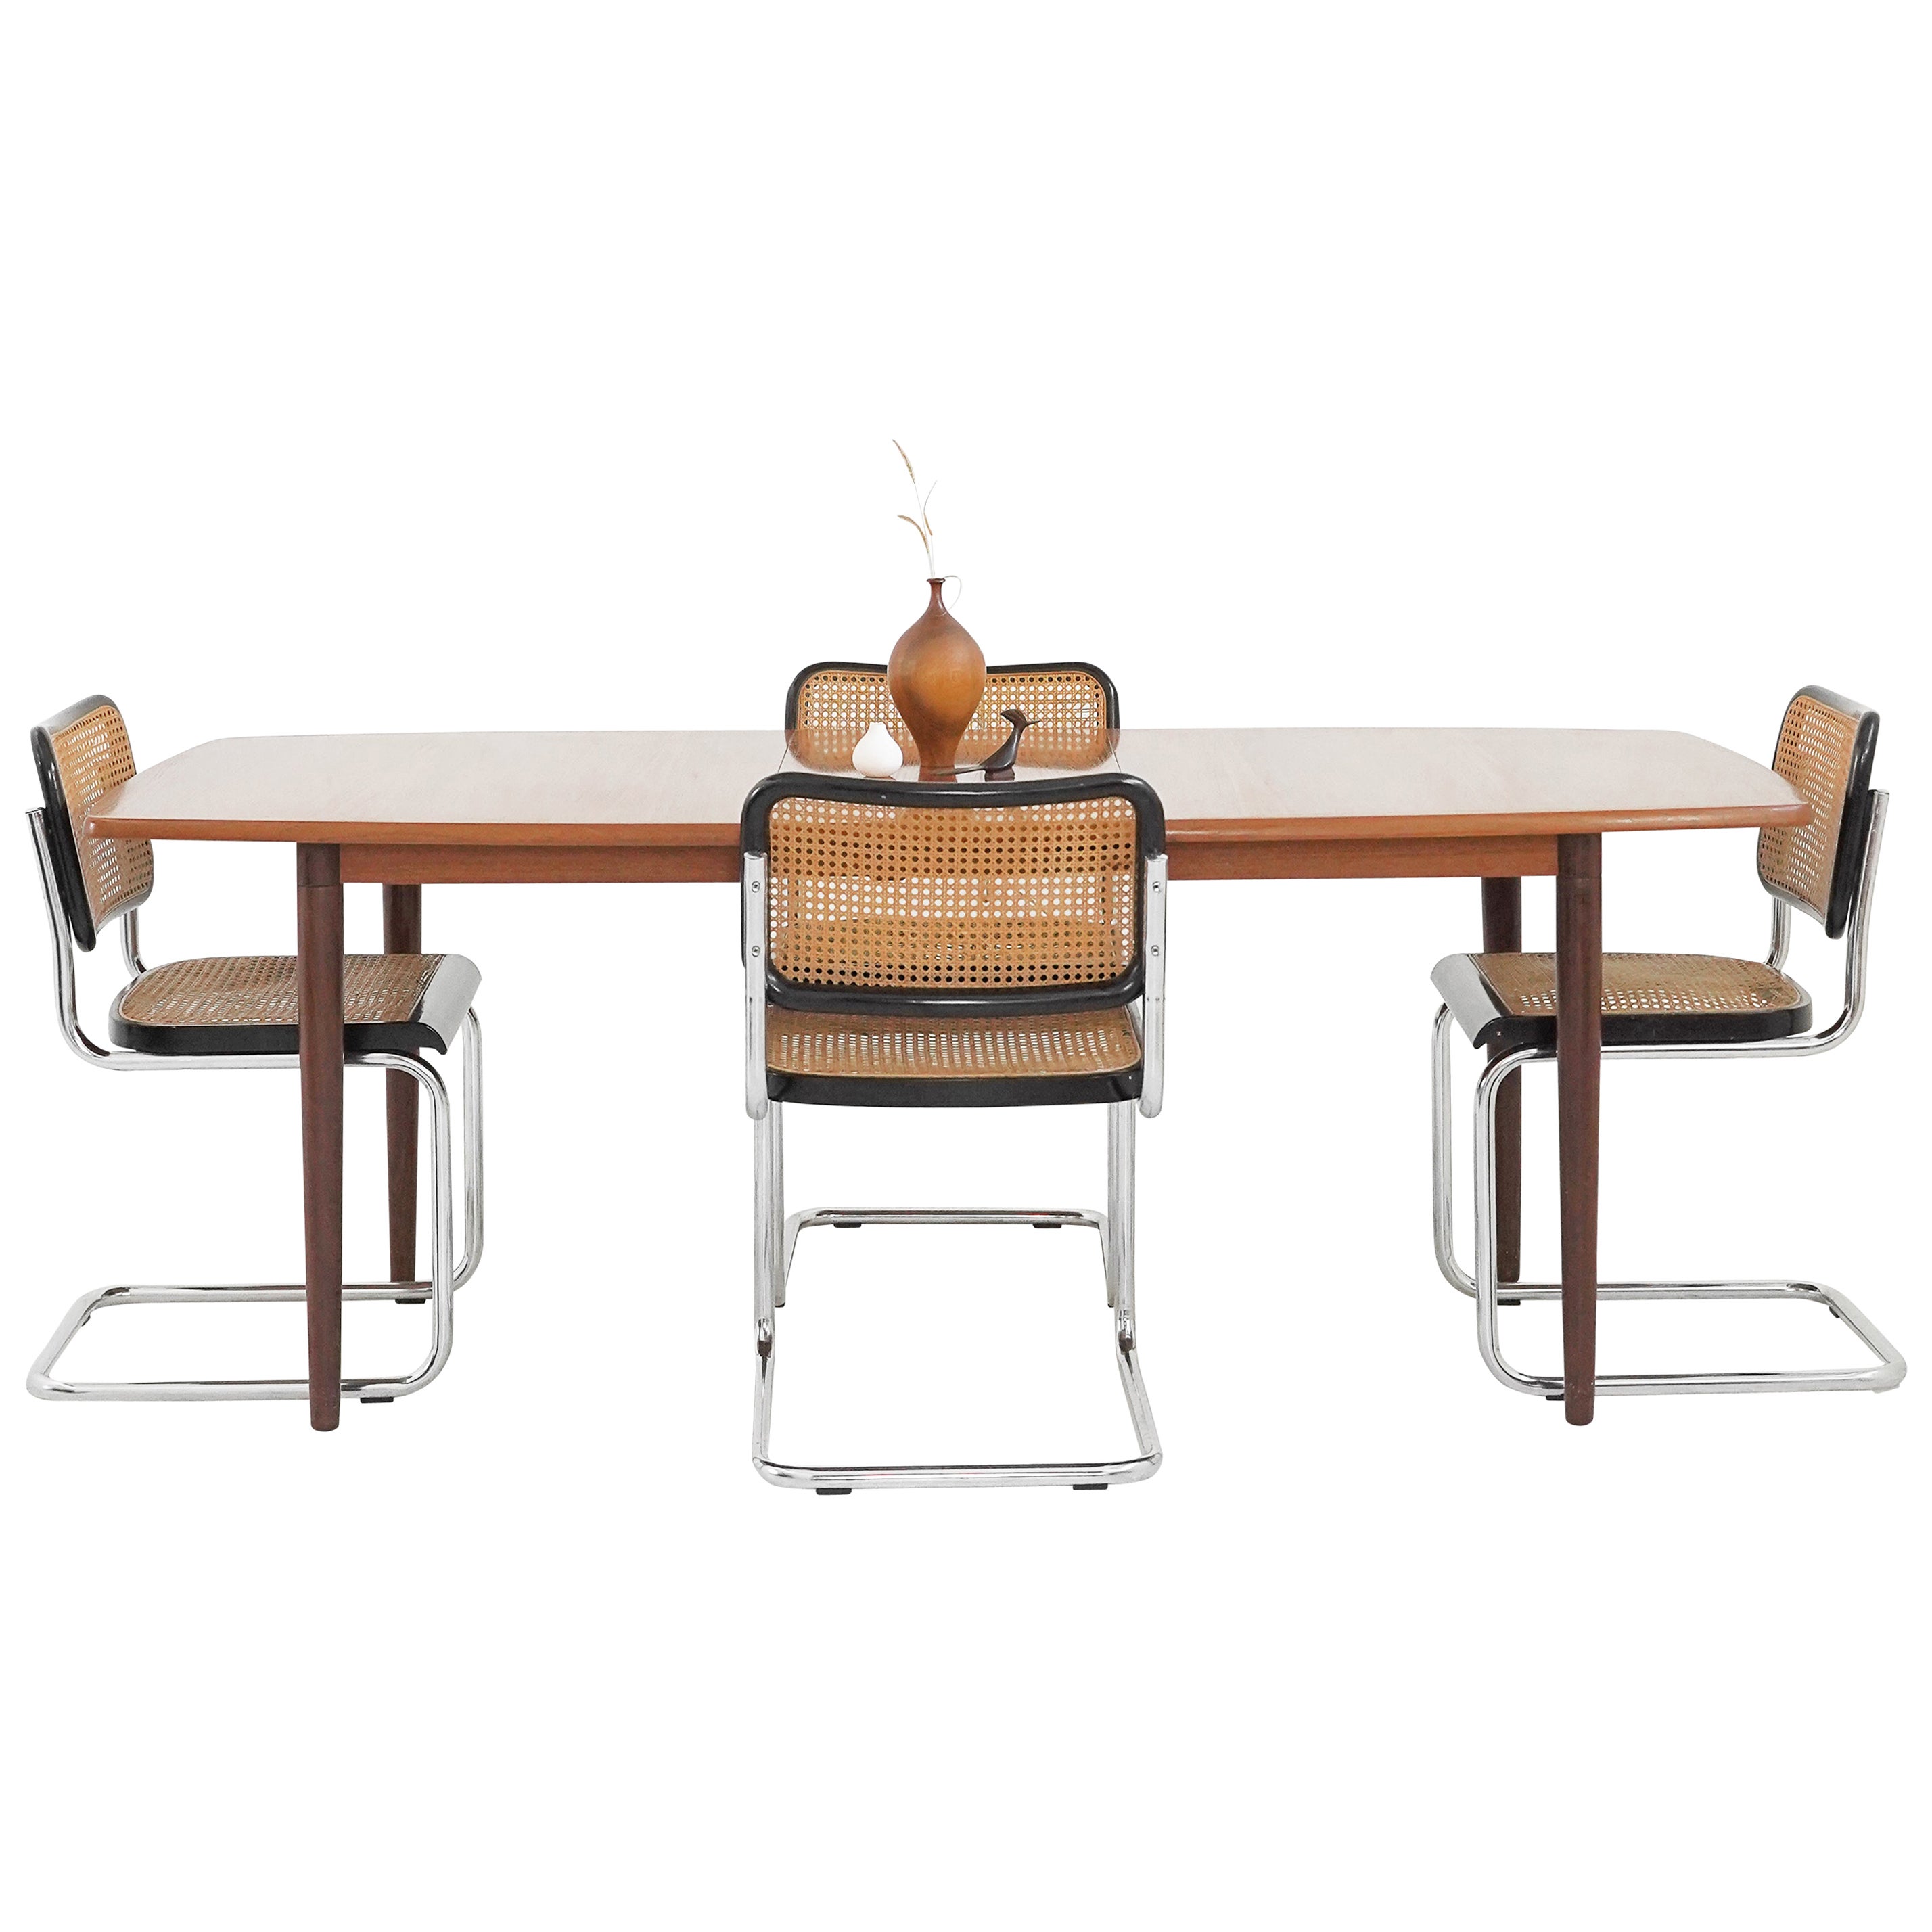 Teak Dining Table with Extension Leaves by Alf Aarseth for Gustav Bahus